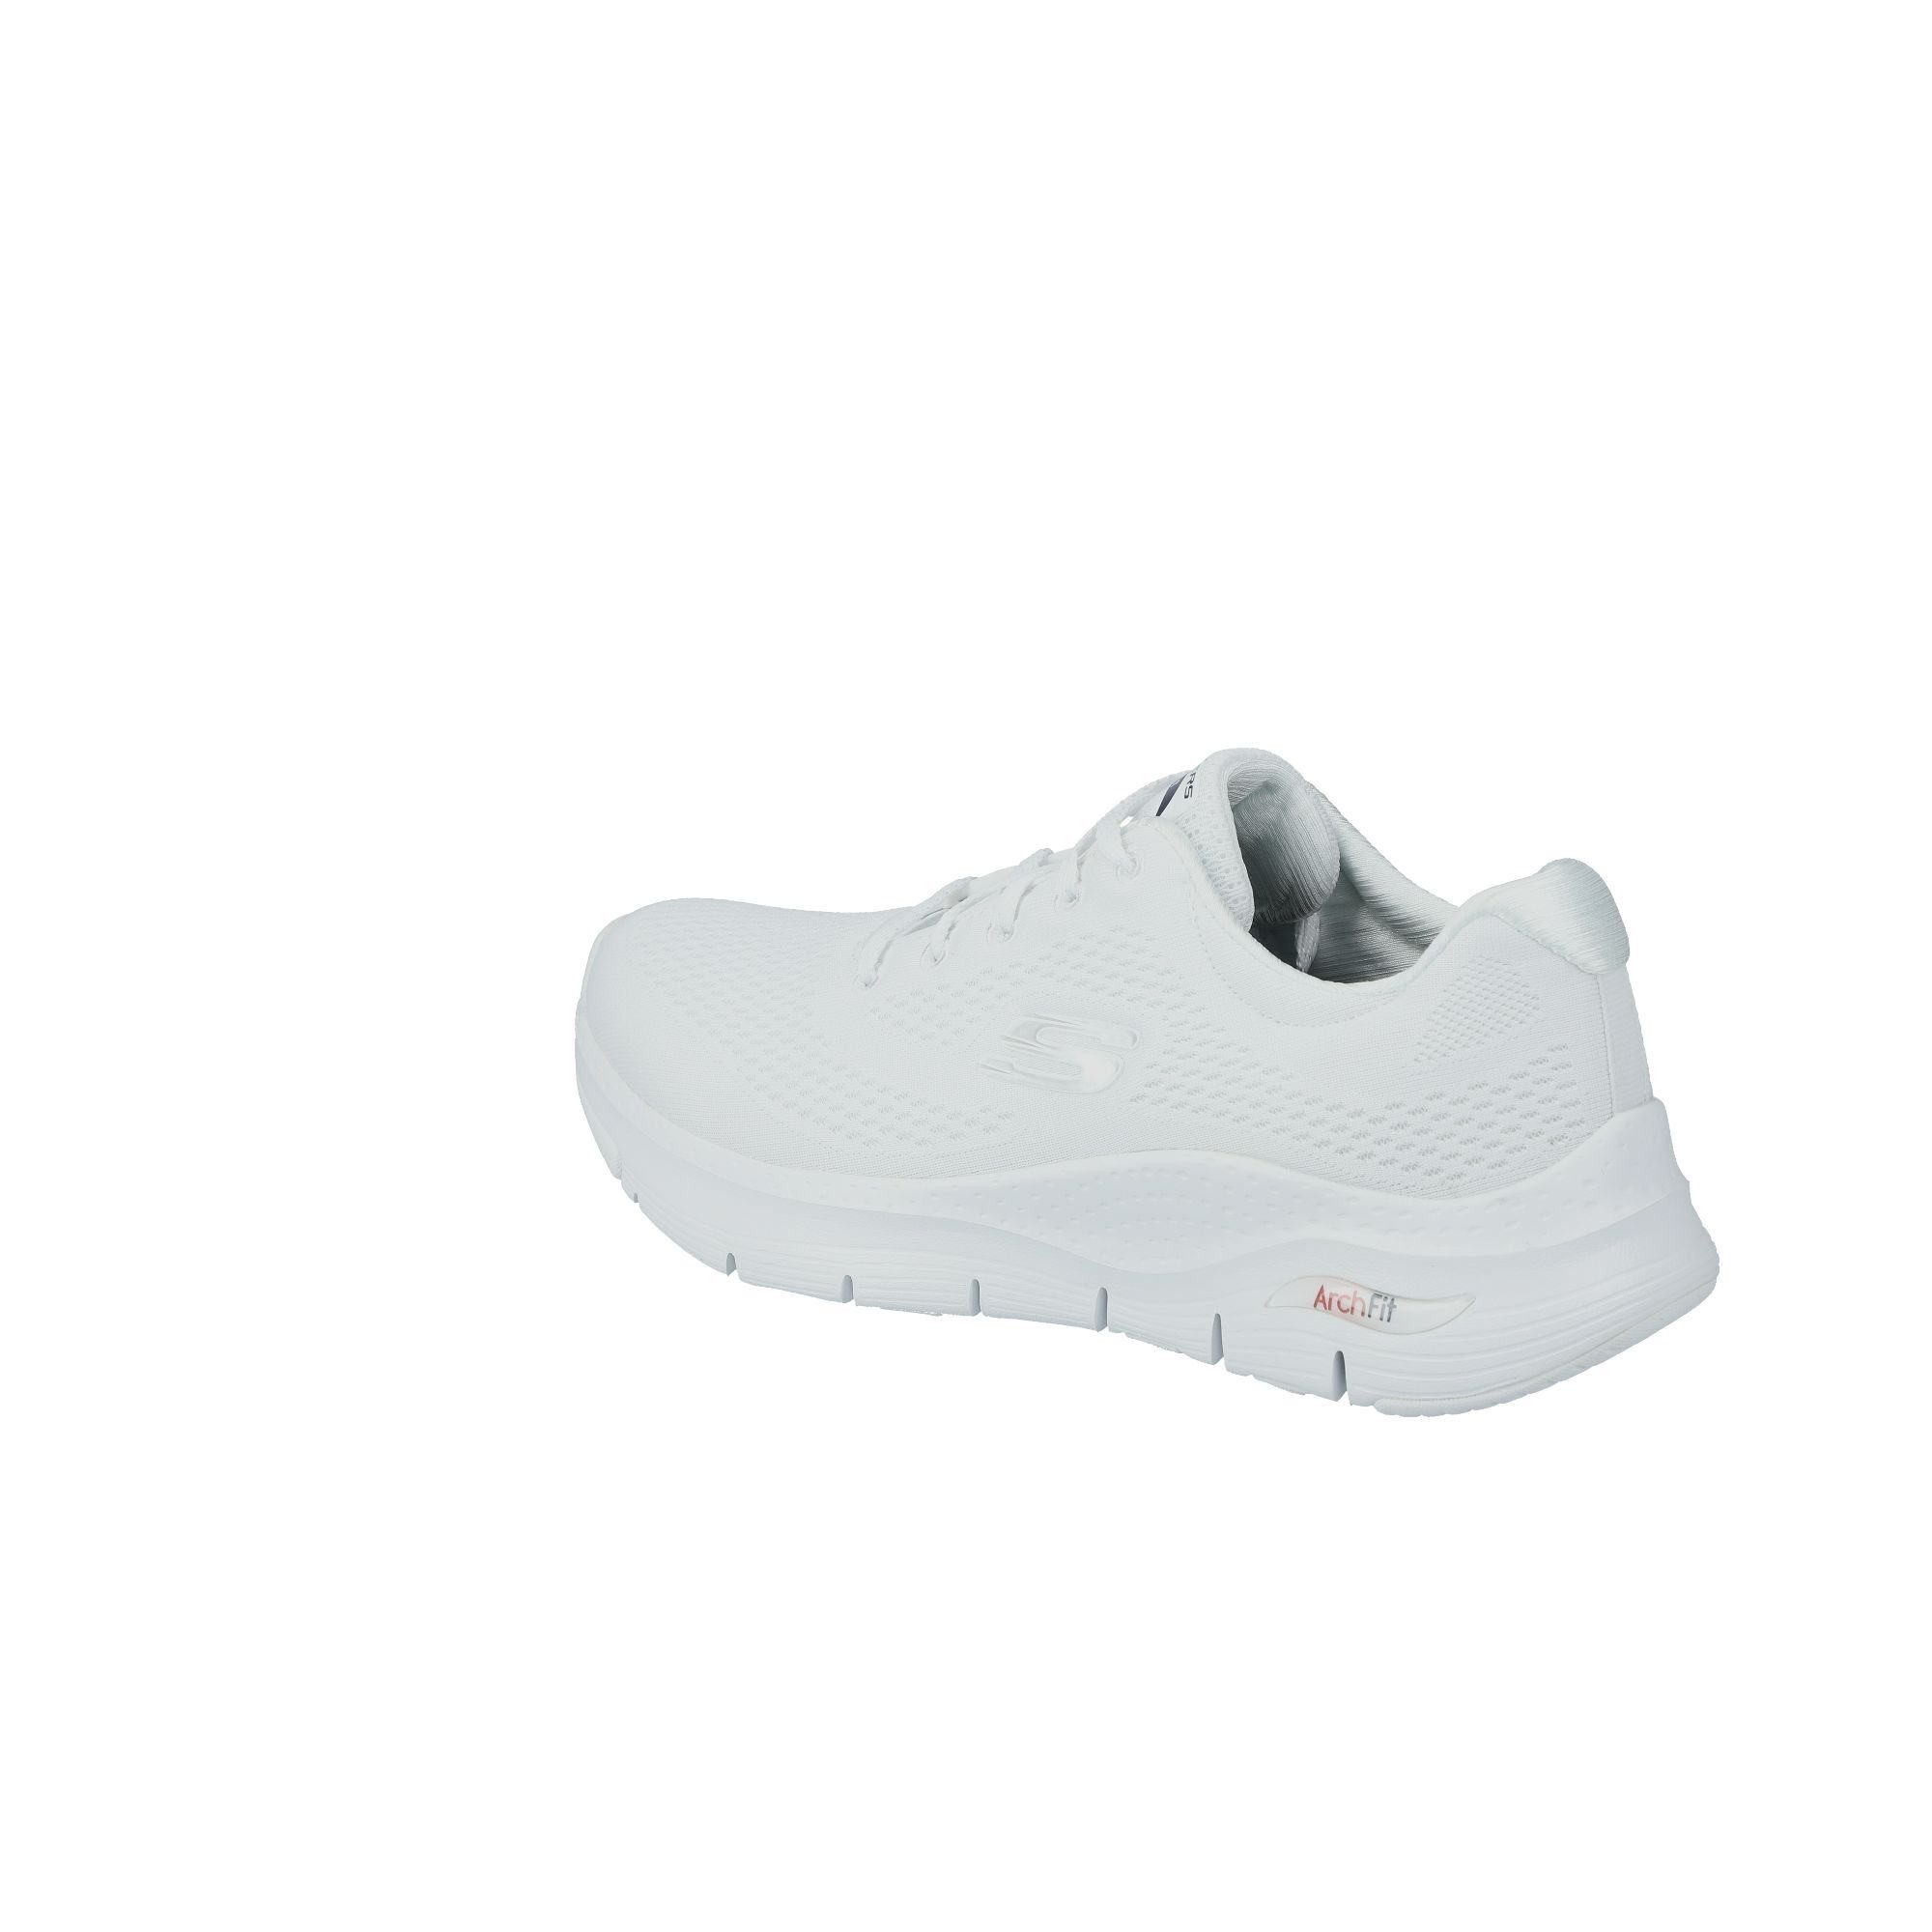 Skechers APPEAL SKECHERS BIG FIT - (2-tlg) white/navy/red ARCH Sneaker PERFORMANCE